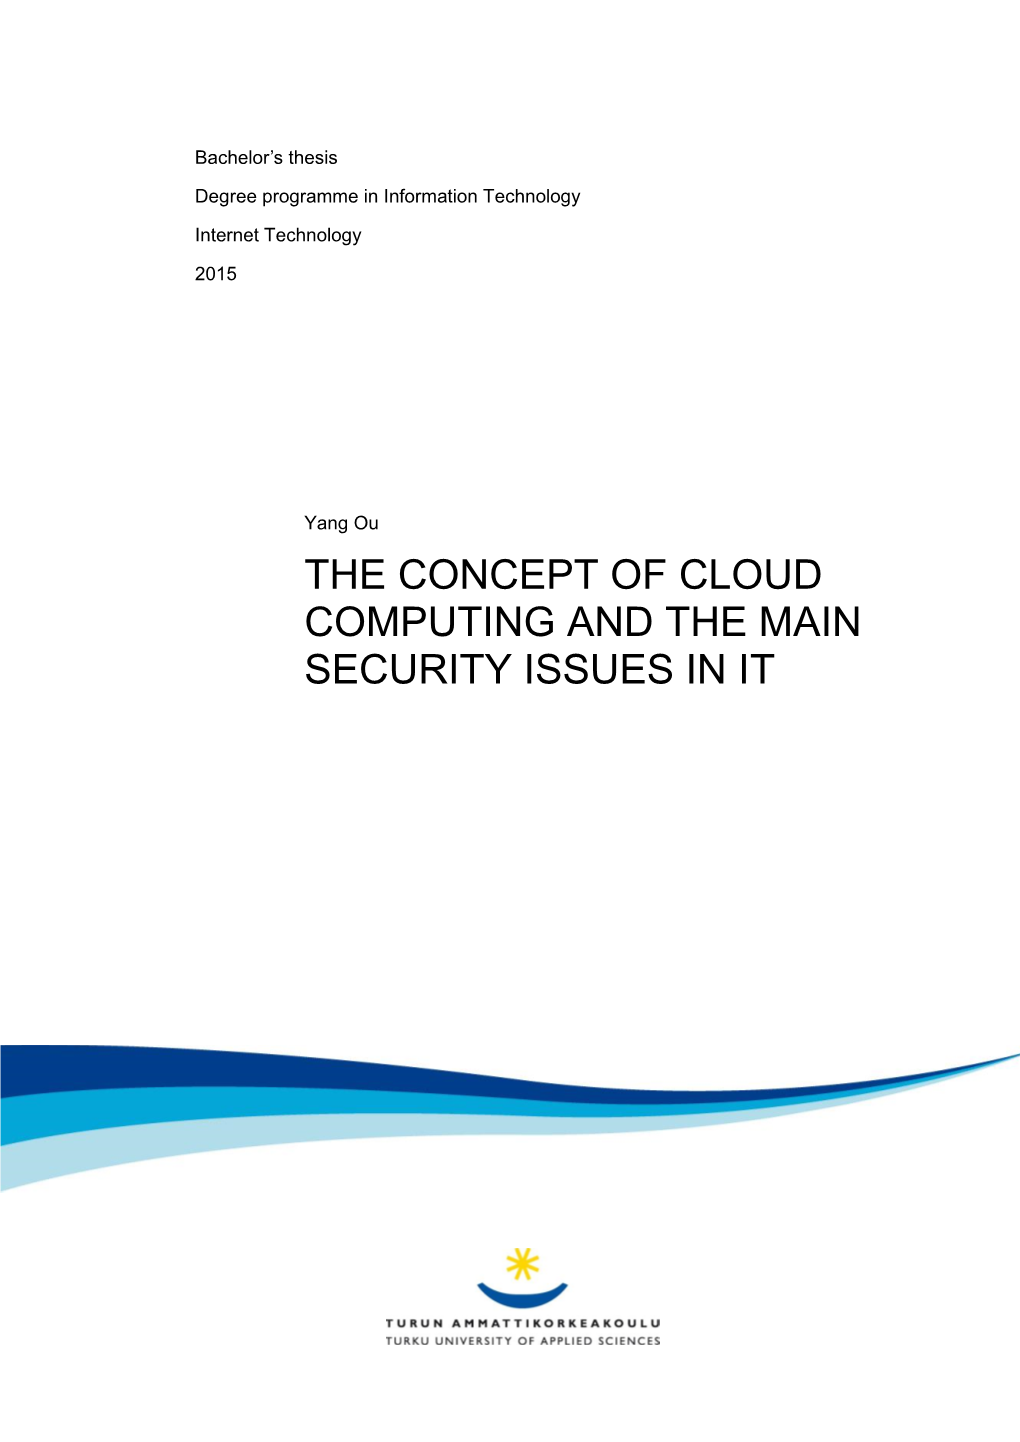 The Concept of Cloud Computing and the Main Security Issues in It